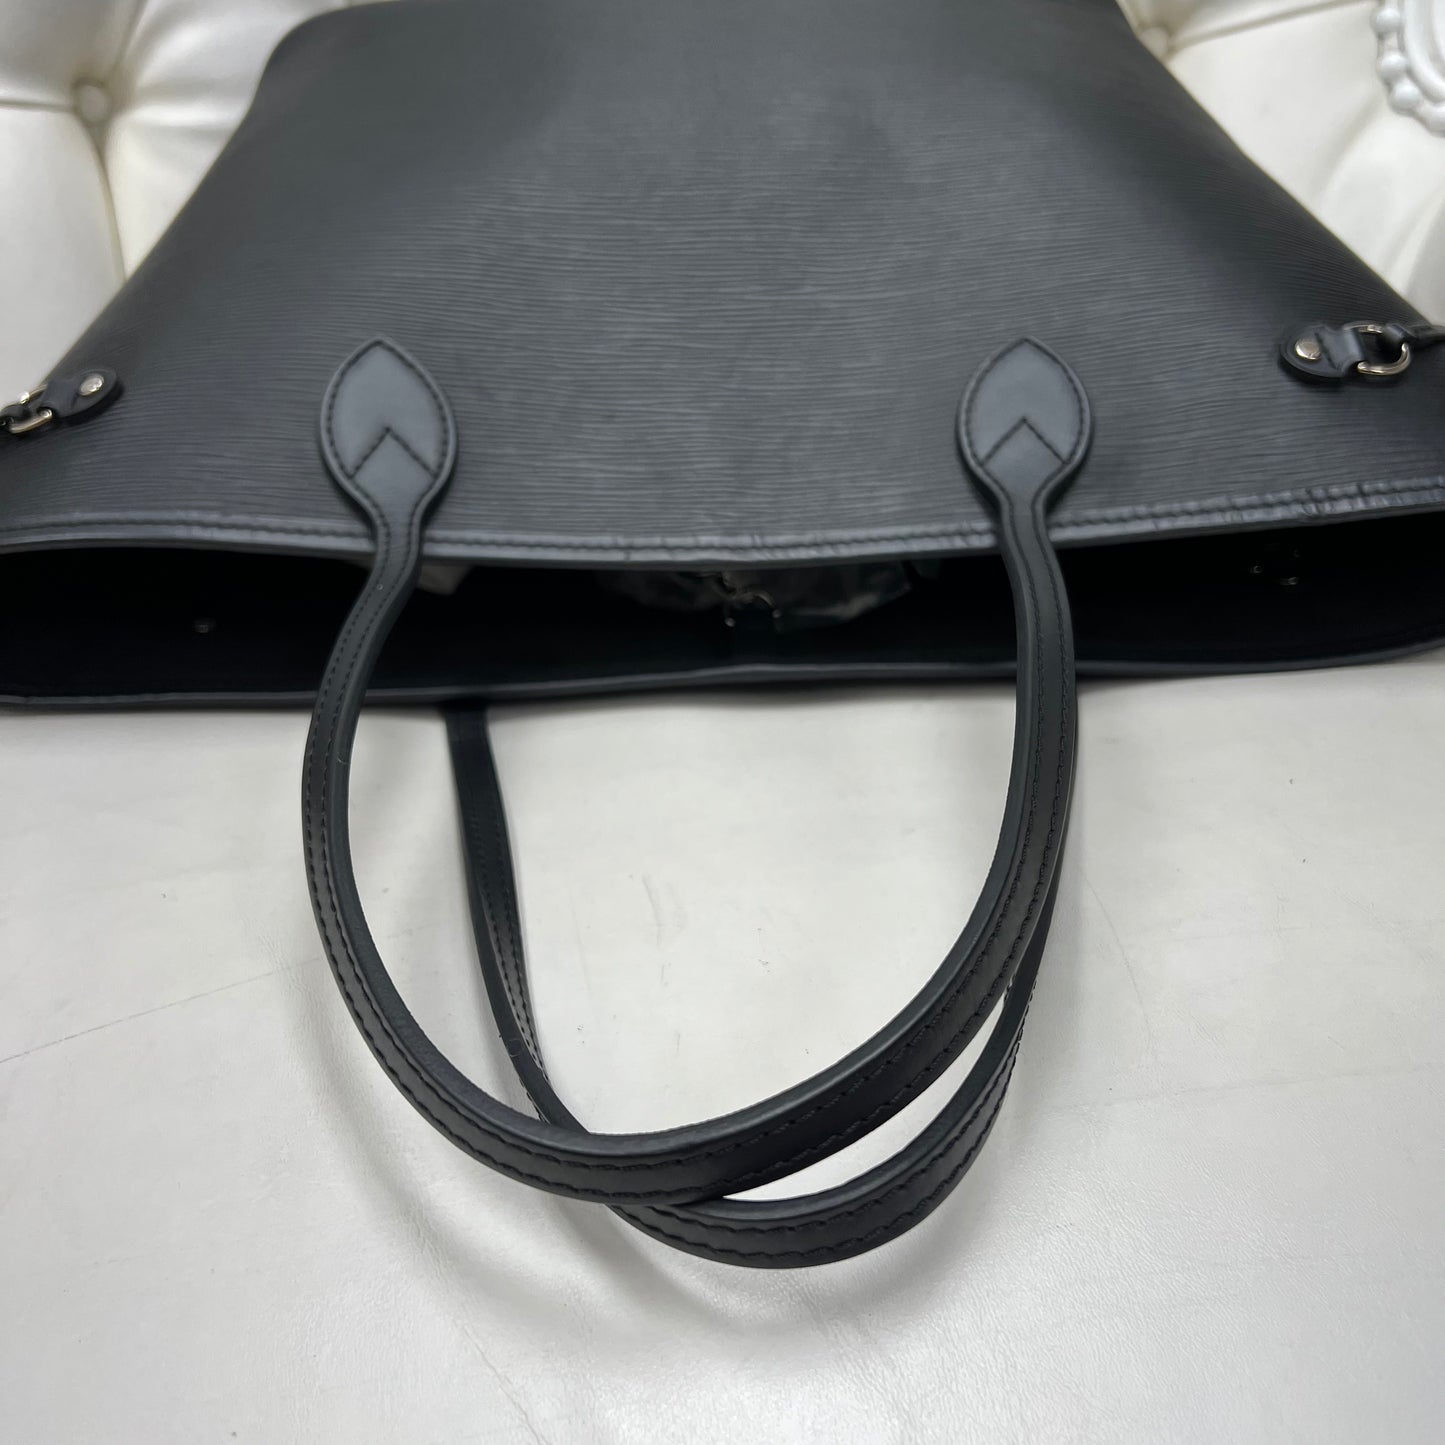 Louis Vuitton Neverfull MM Epi Leather with Dust Bag